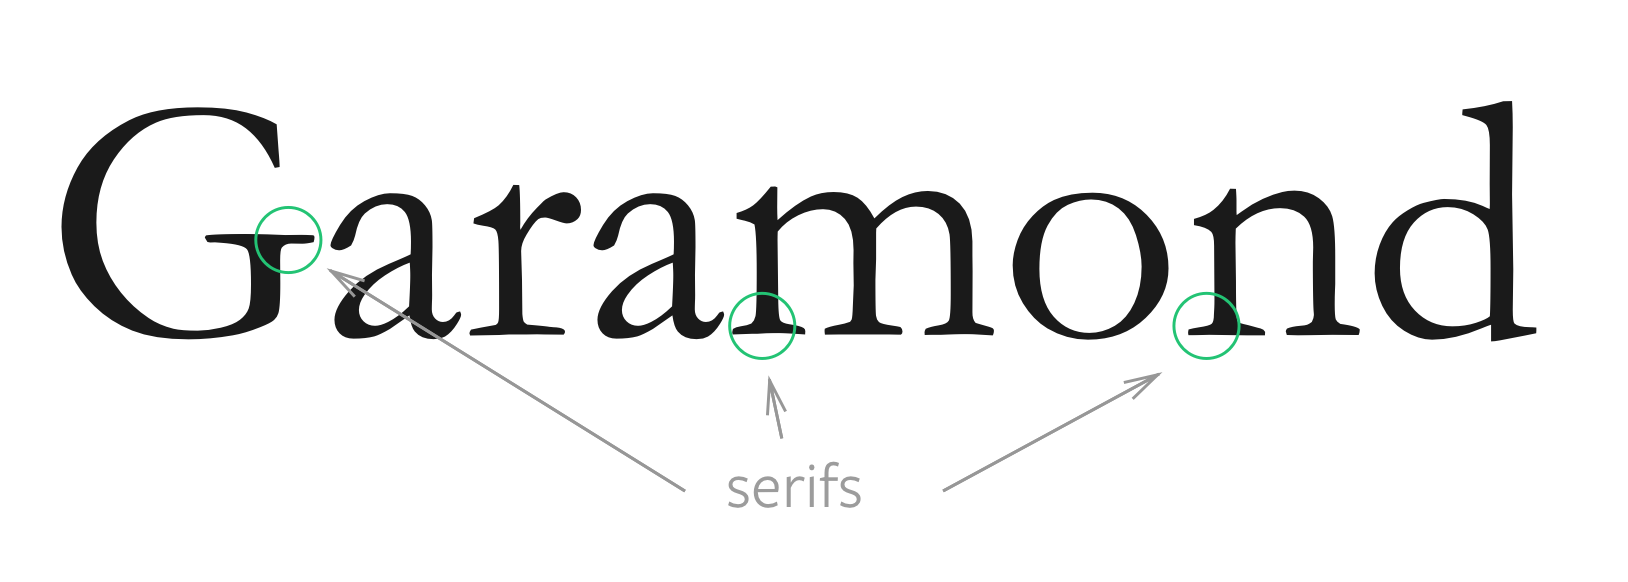 Image of Garamond typeface that contains serifs